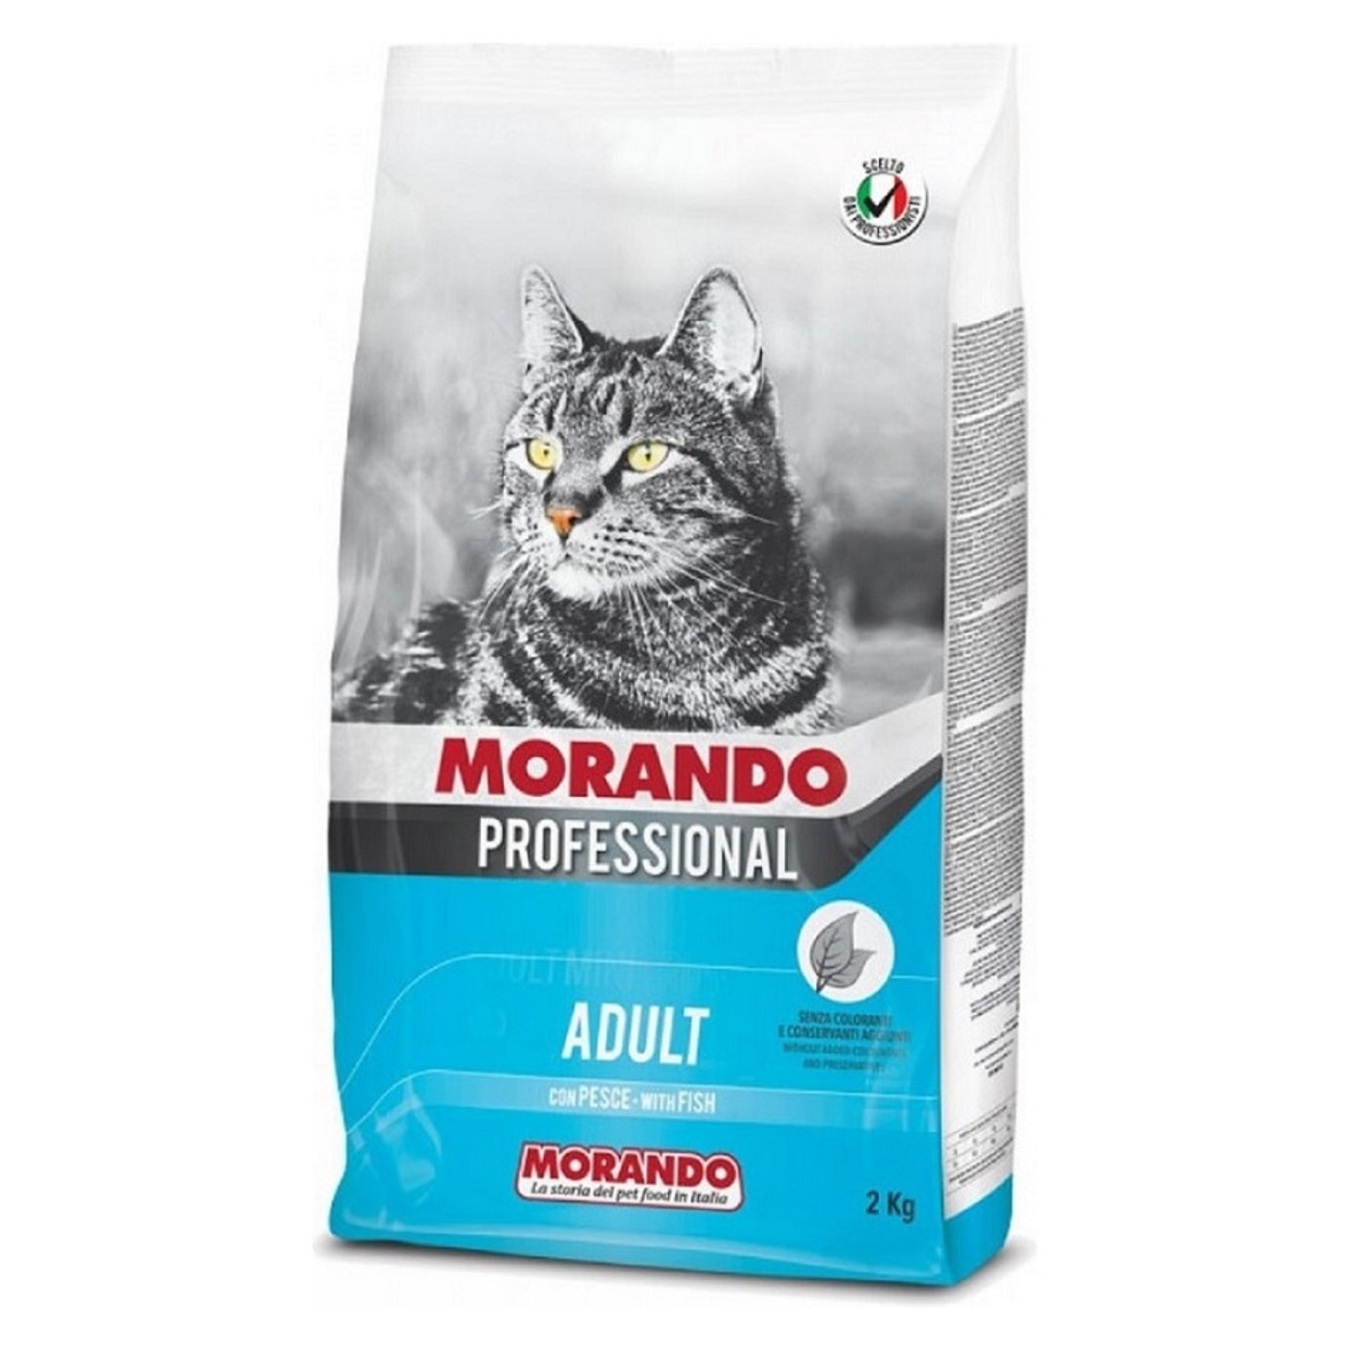 MORANDO PROFESSIONAL dry food with fish for adult cats 2 kg